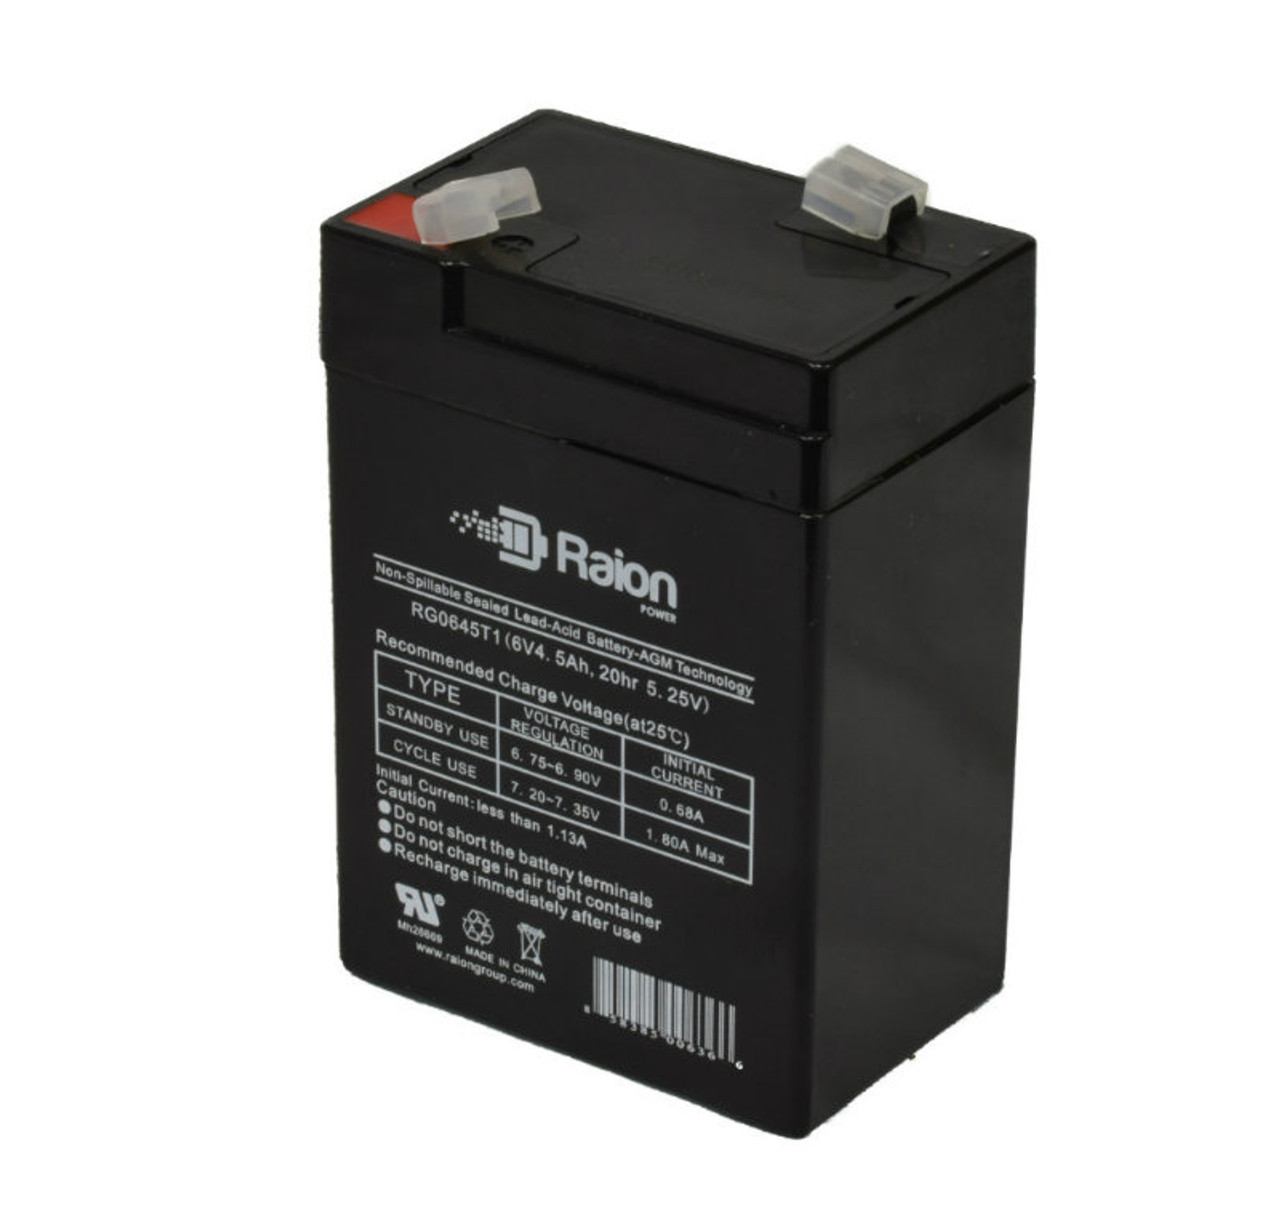 Raion Power RG0645T1 6V 4.5Ah Replacement Battery Cartridge for Leadhoo NP4.5-6